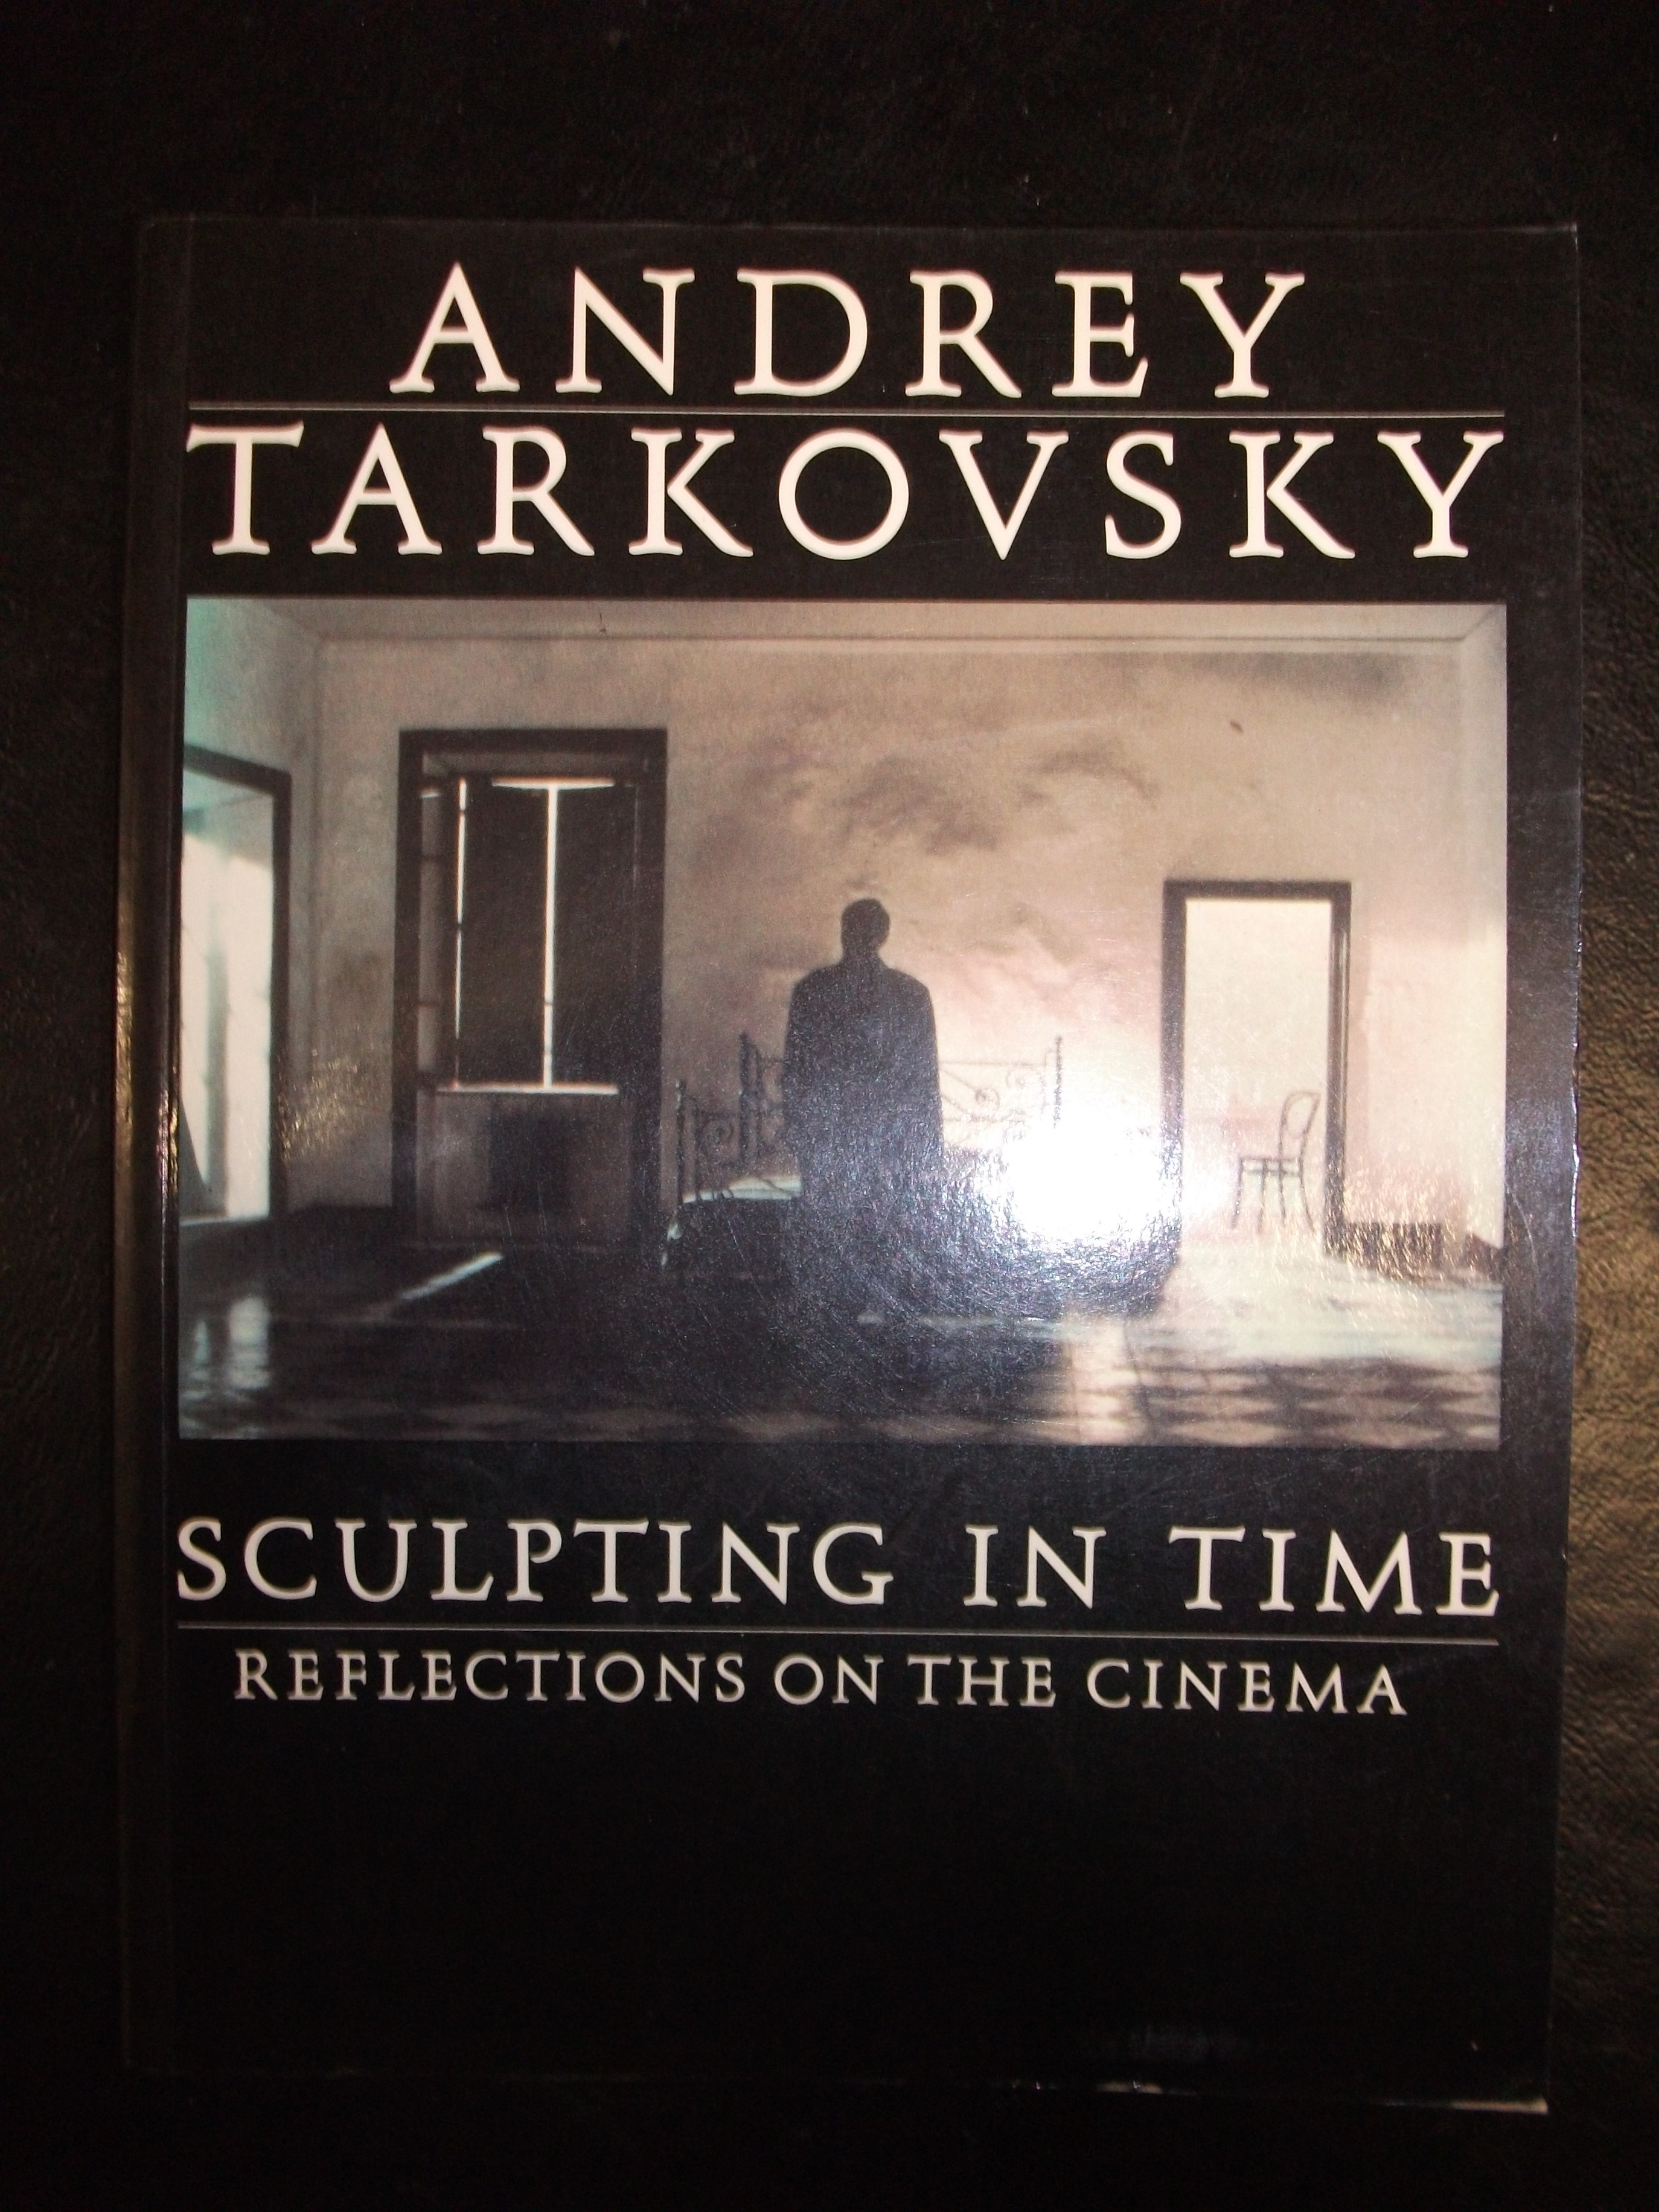 Sculpting in Time: Reflections on the Cinema by Tarkovsky Andrey Hunter-Blair, Kitty: Near Fine (1986) Edition | Books